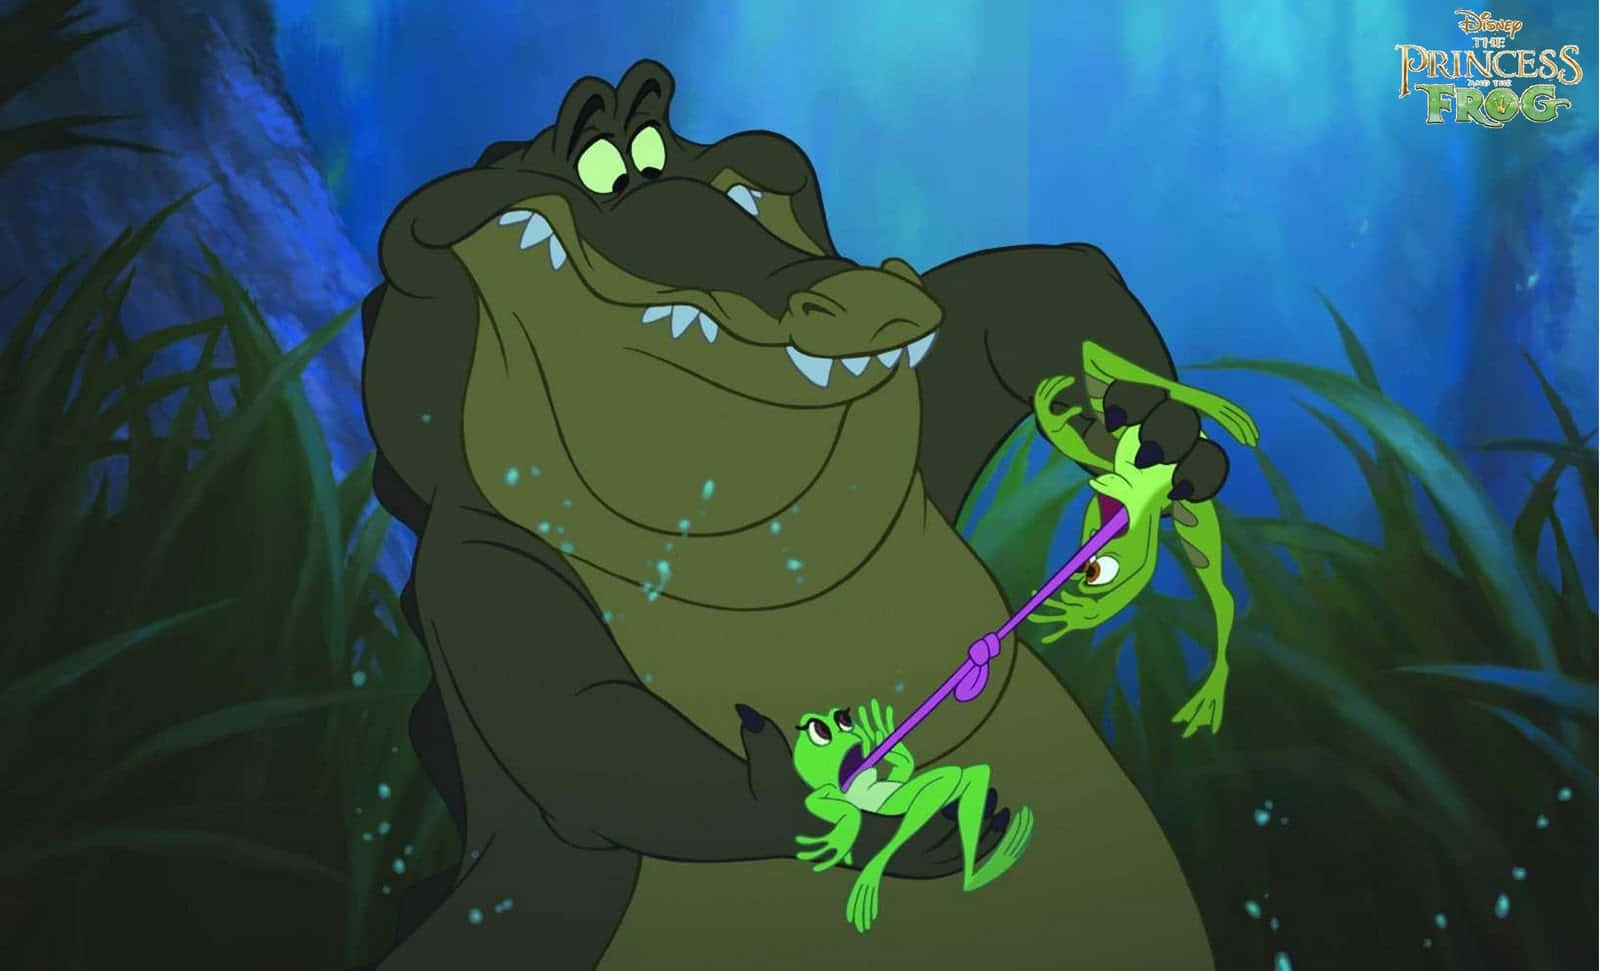 "Tiana and the Frog Enjoy a Magical Moment in the Bayou"